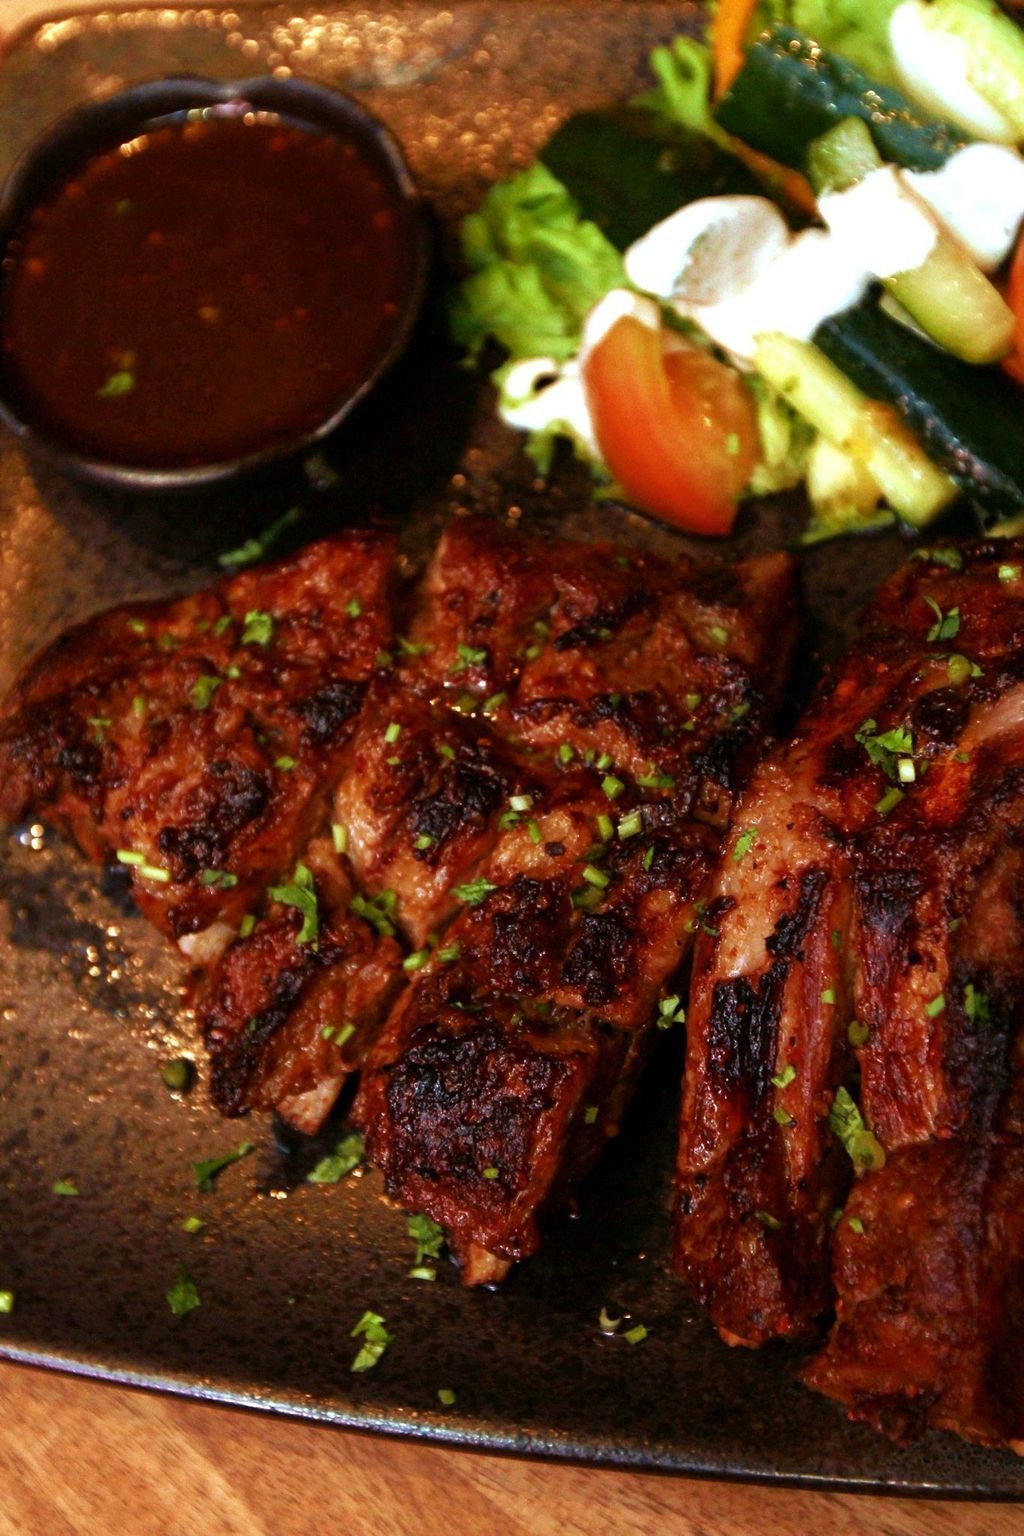 Iberico-pork-ribs-served-with-Black-Markets-house-specialty-sauce.jpg